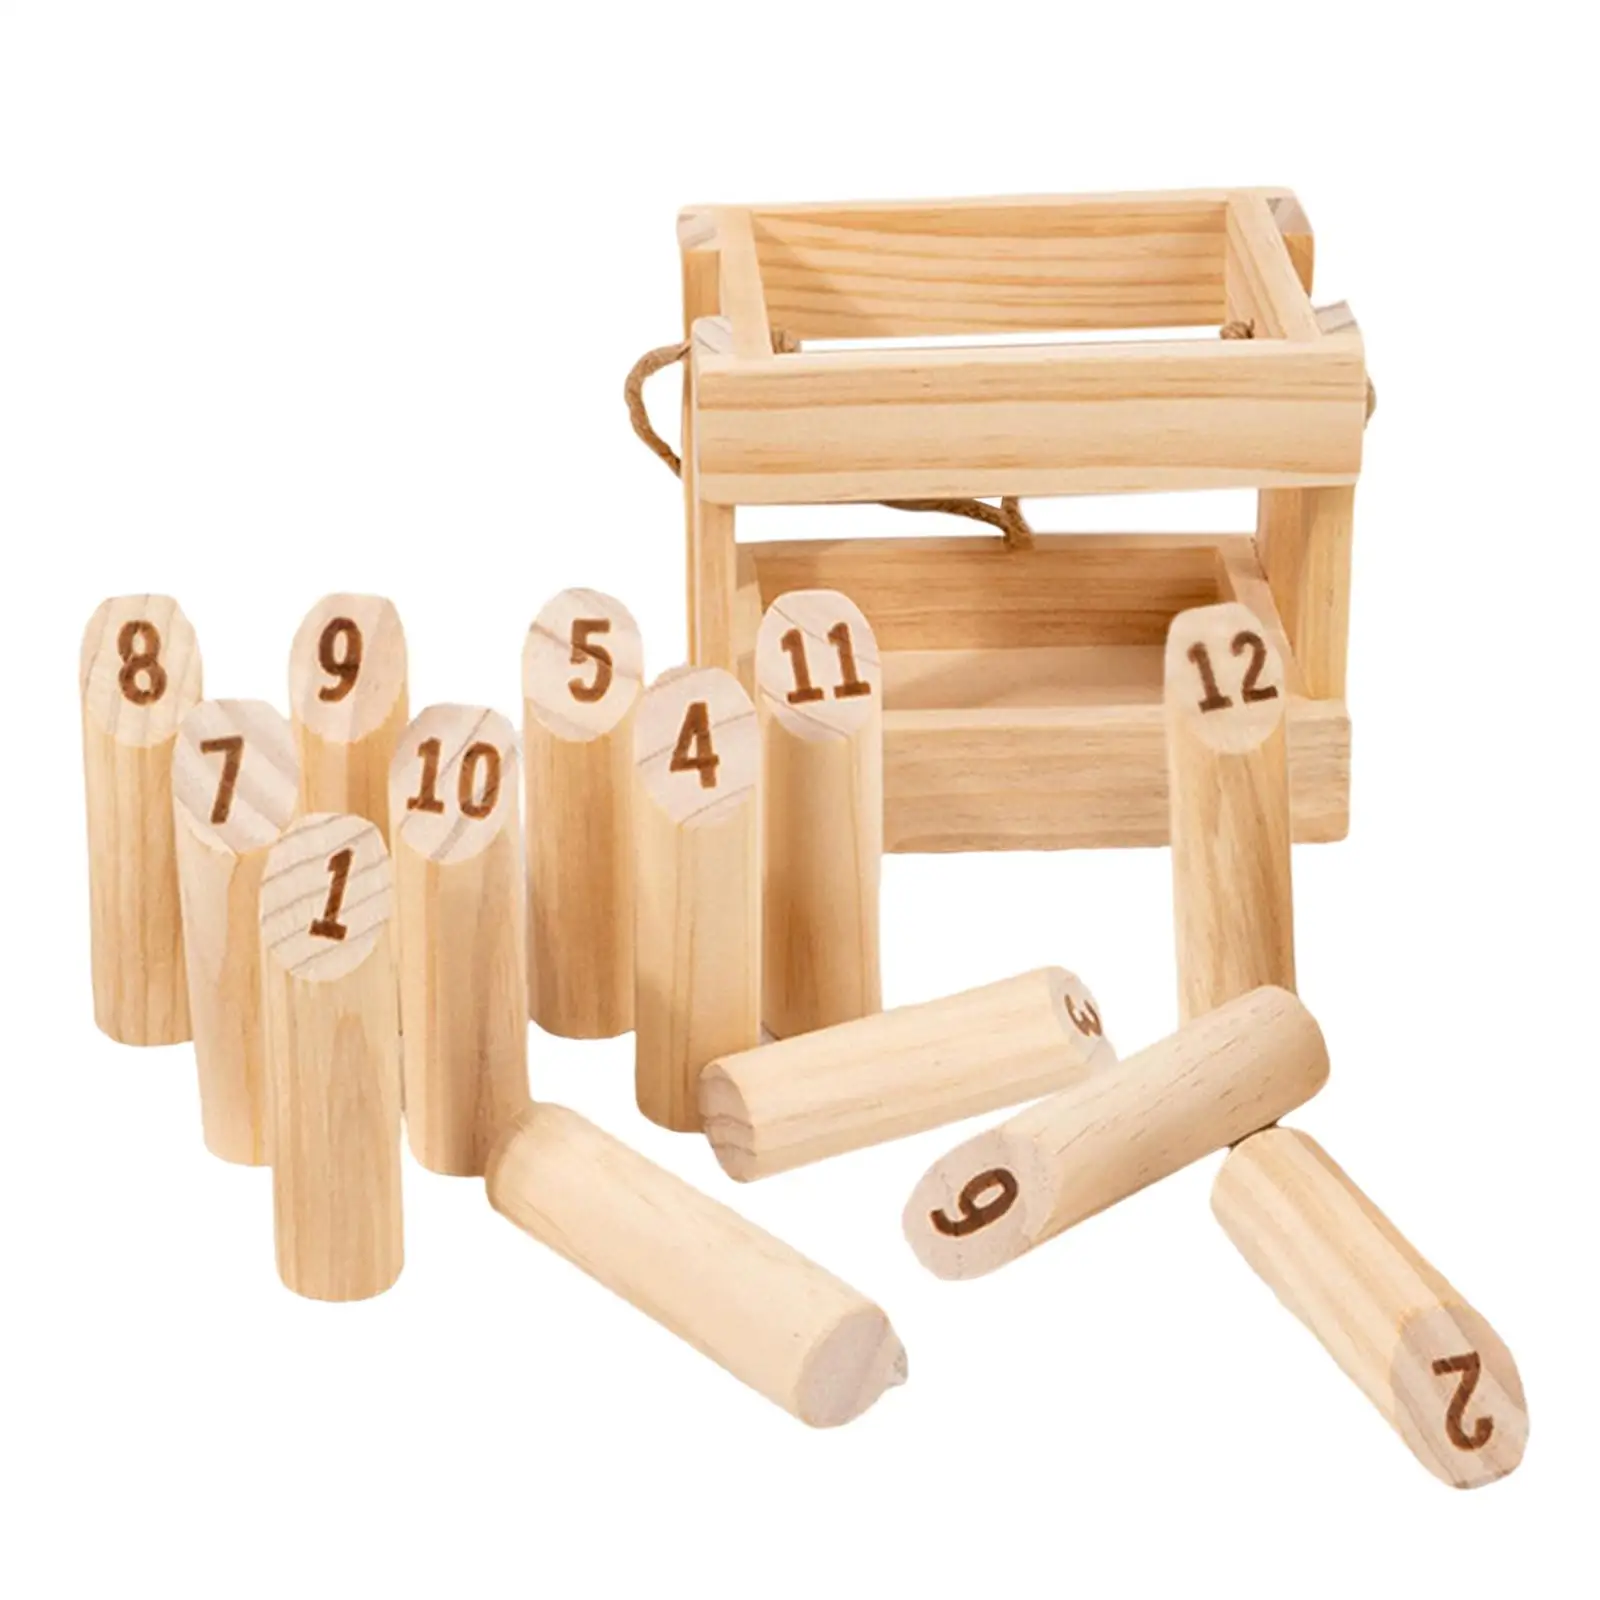 Wooden Tossing Game Throwing Bowling 12 Pcs Numbered Pins Premium Hardwood for